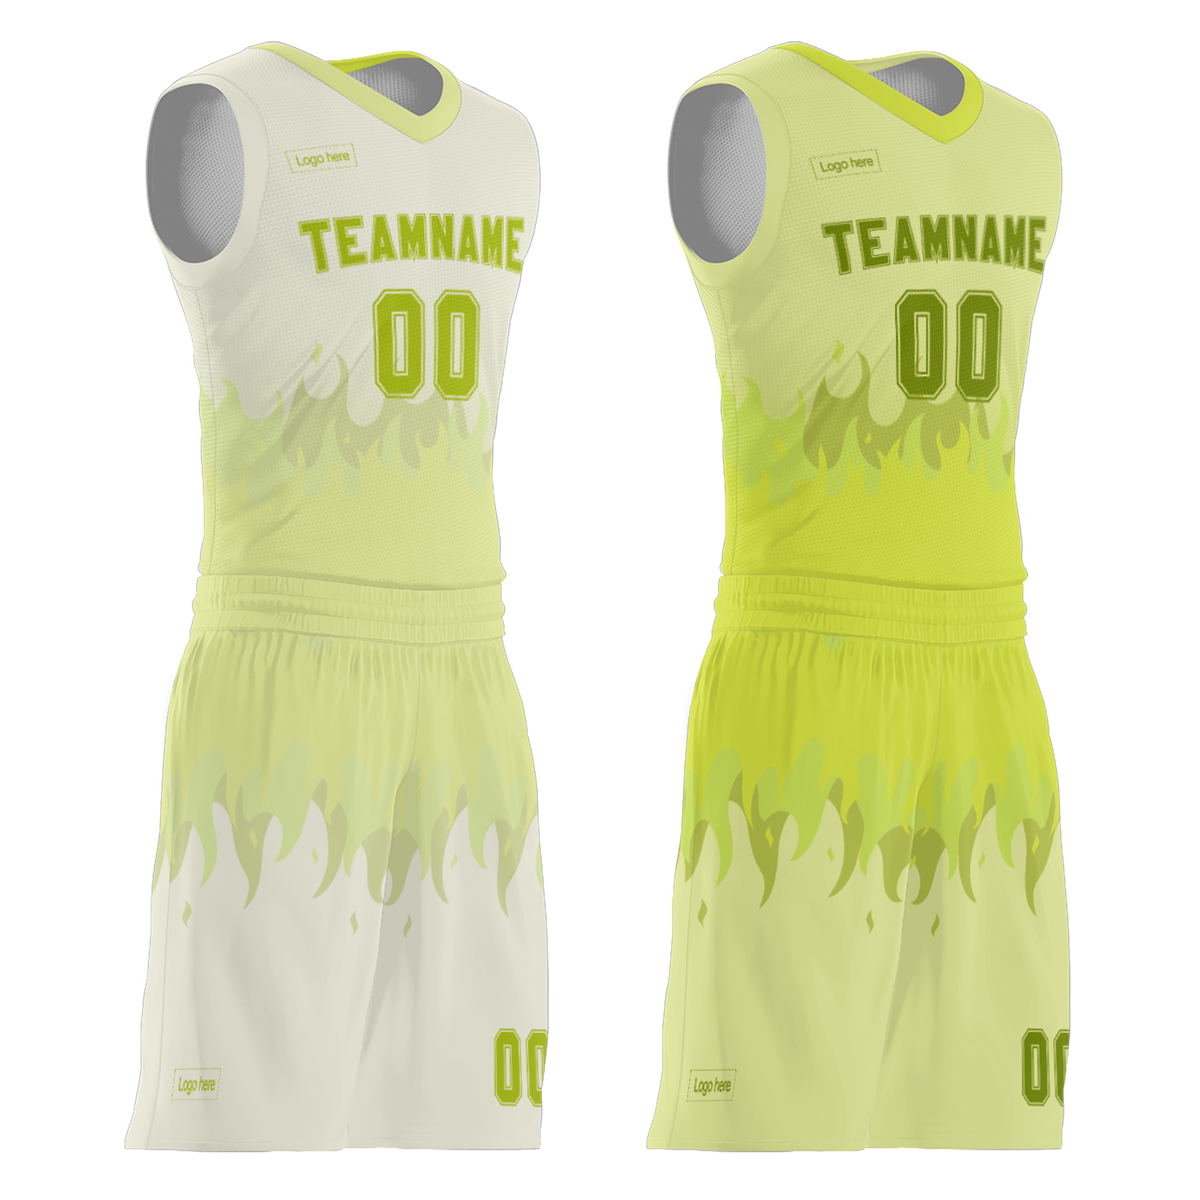 Customized with Personalized Logo and Printing Basketball Team Name Reversible Basketball Jerseys